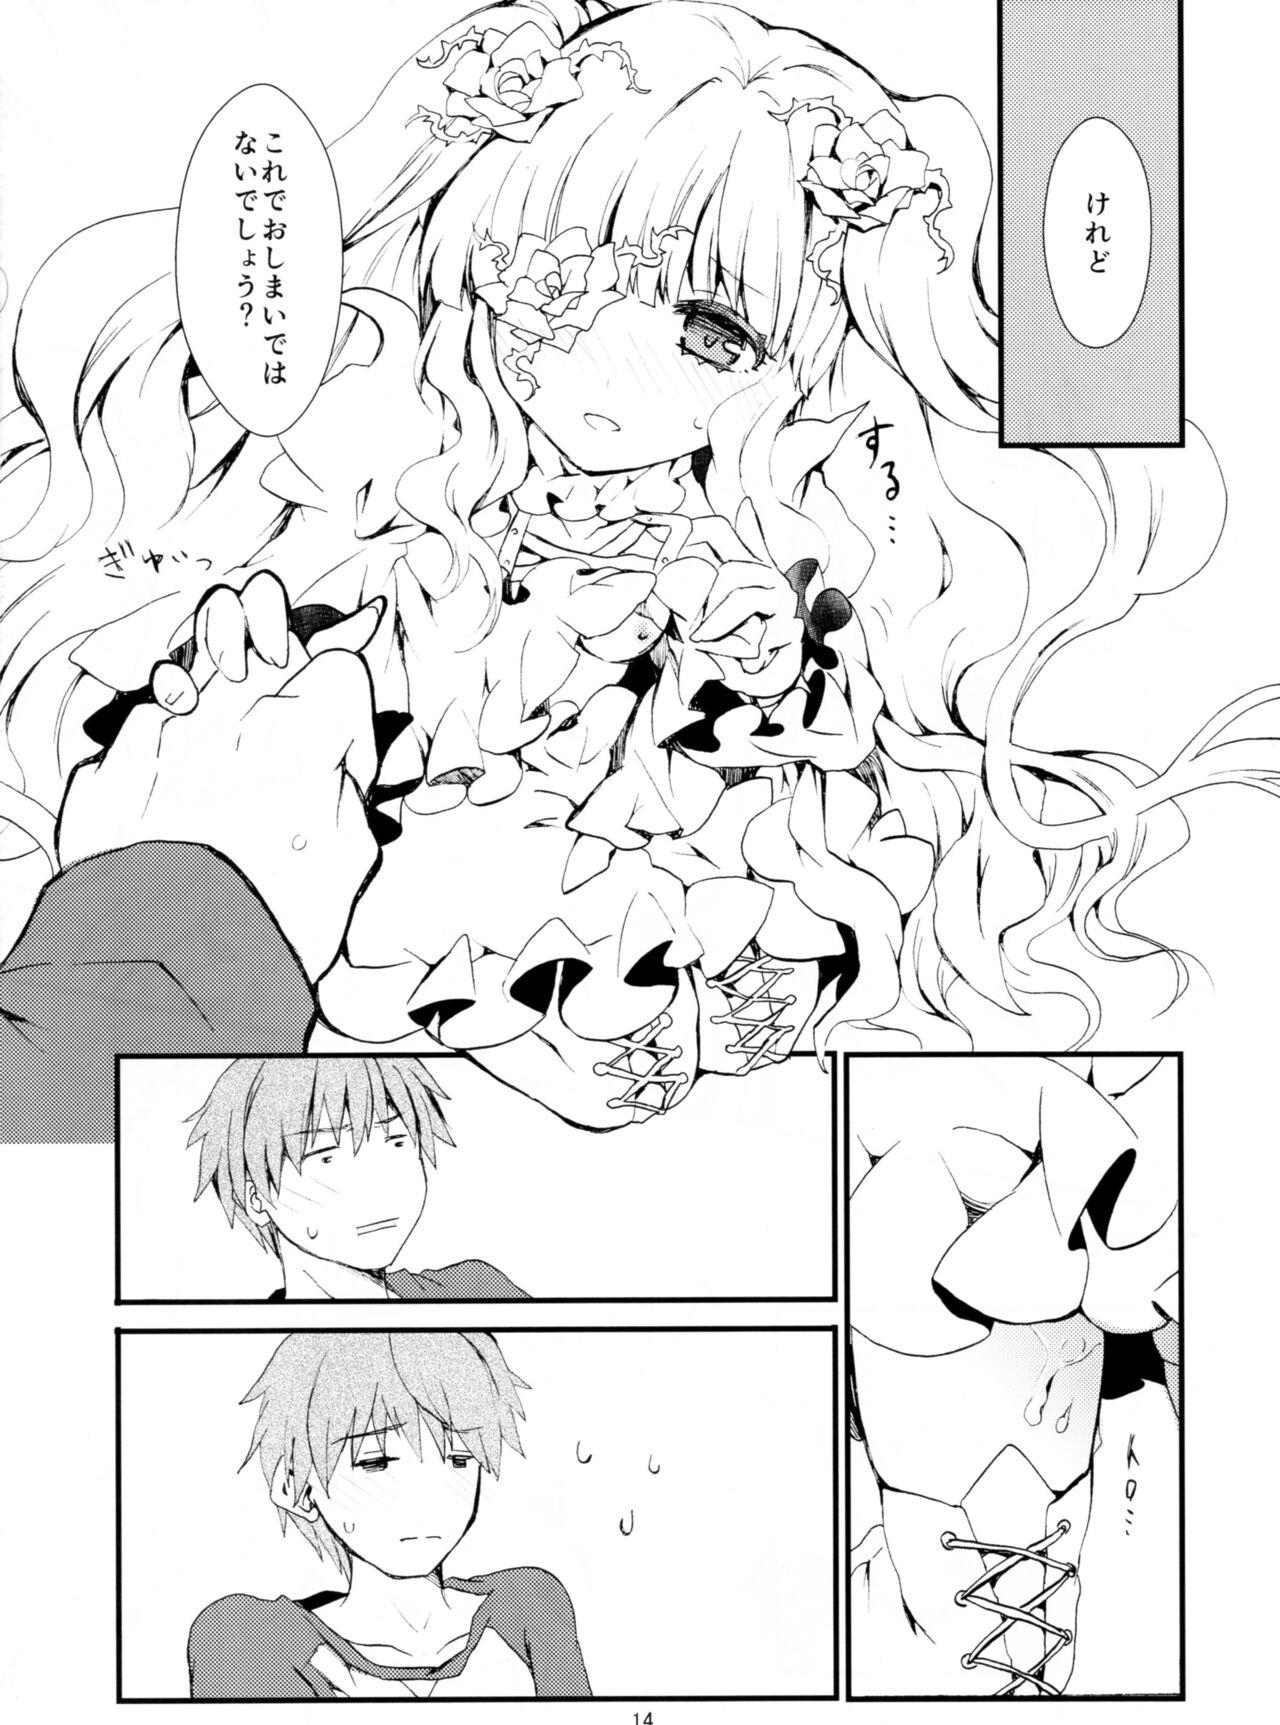 Free 18 Year Old Porn Eat me, Drink me - Rozen maiden Bigboobs - Page 11